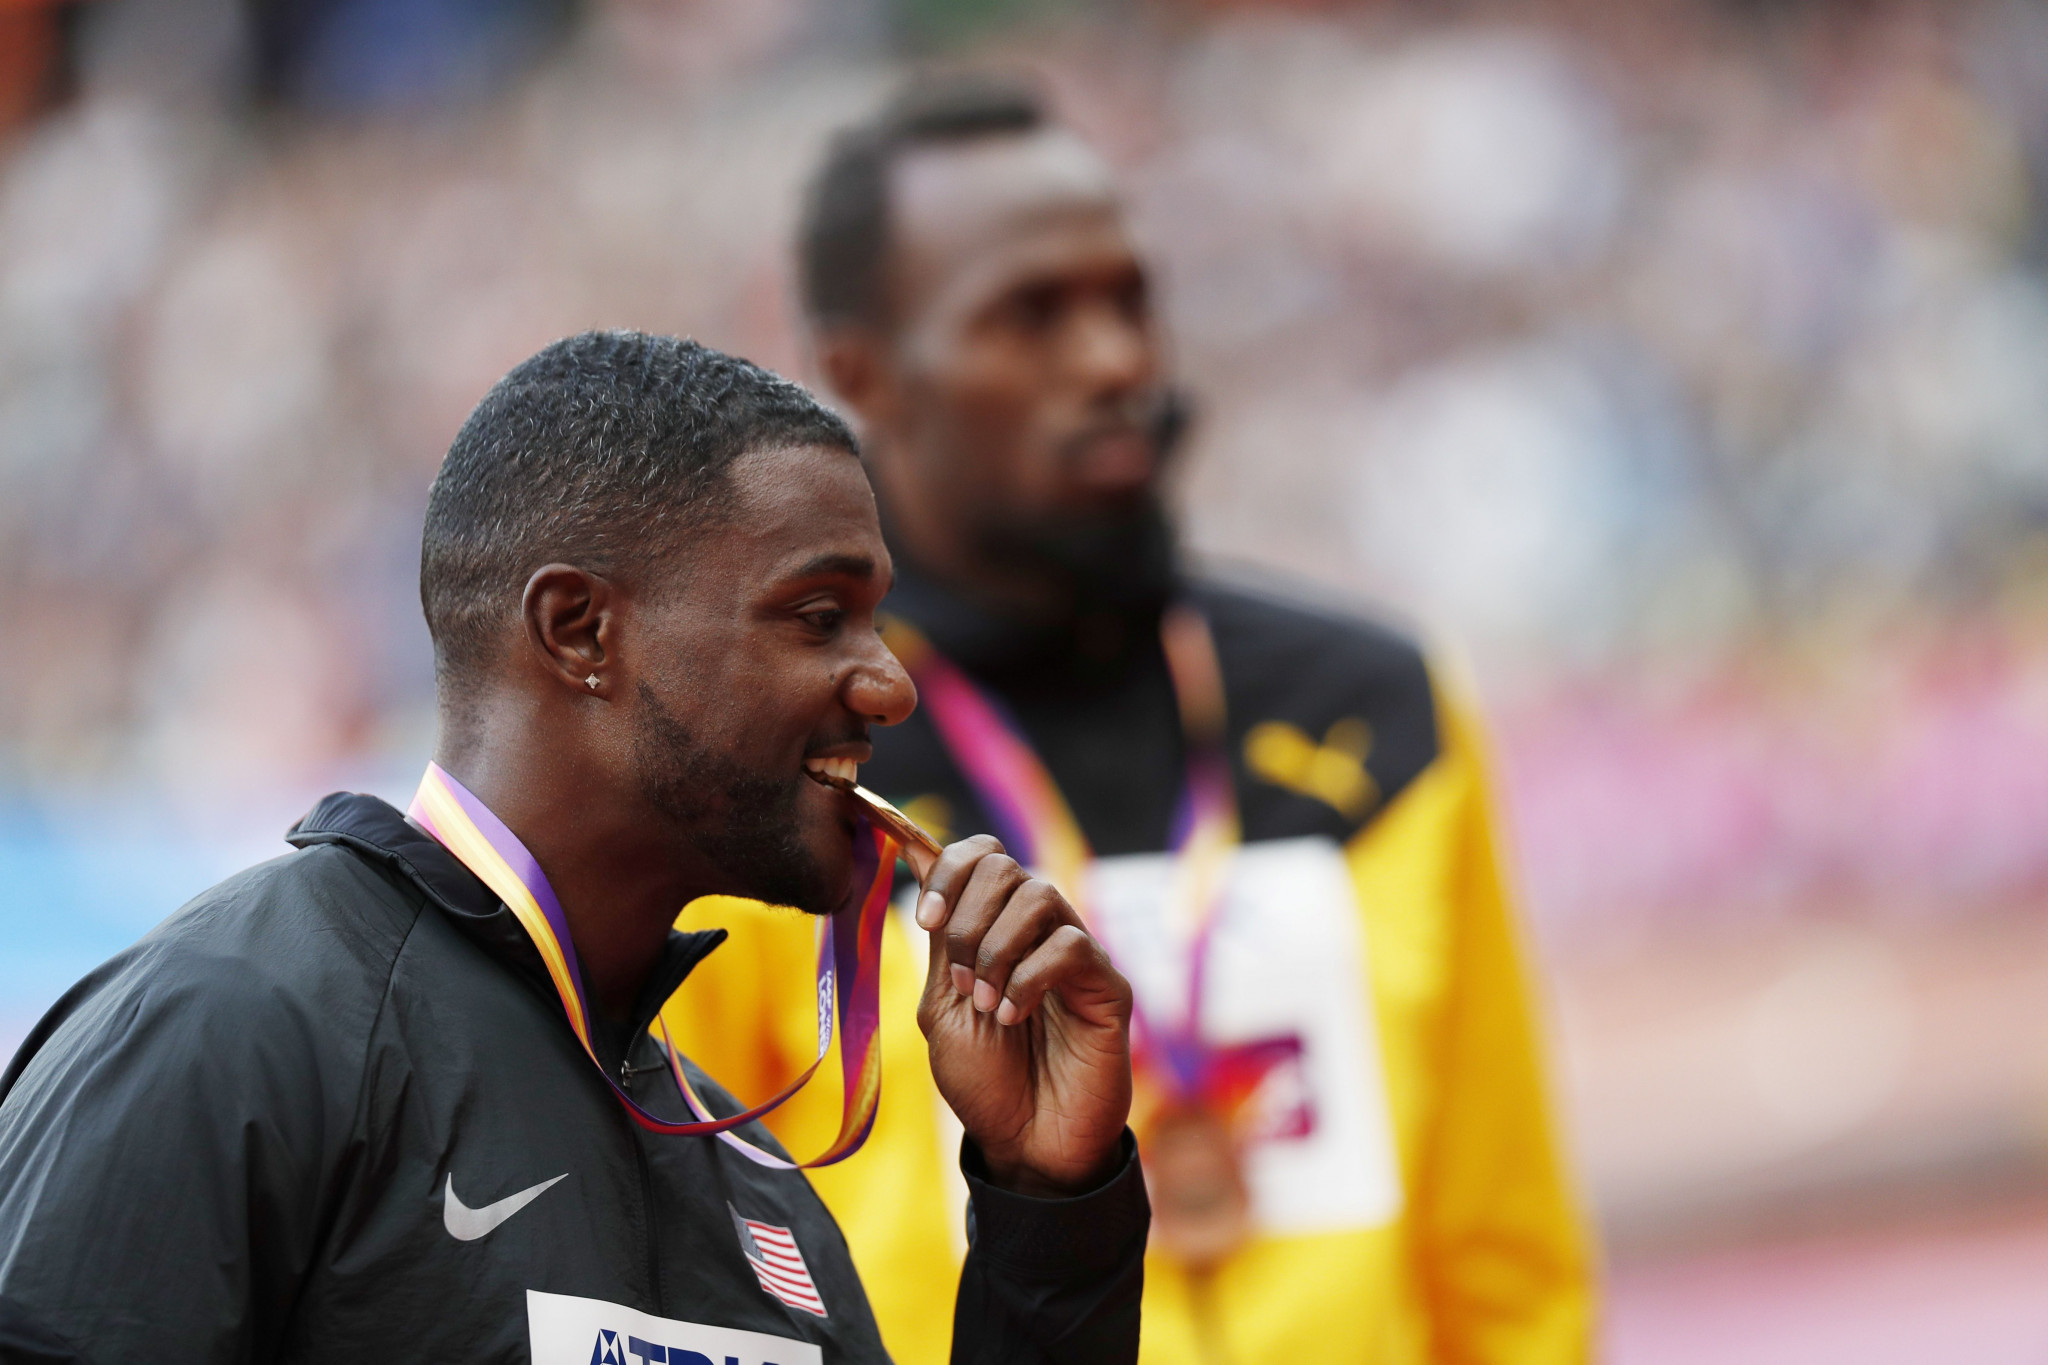 Justin Gatlin won the 100m at this year's World Championships in London ©Getty Images